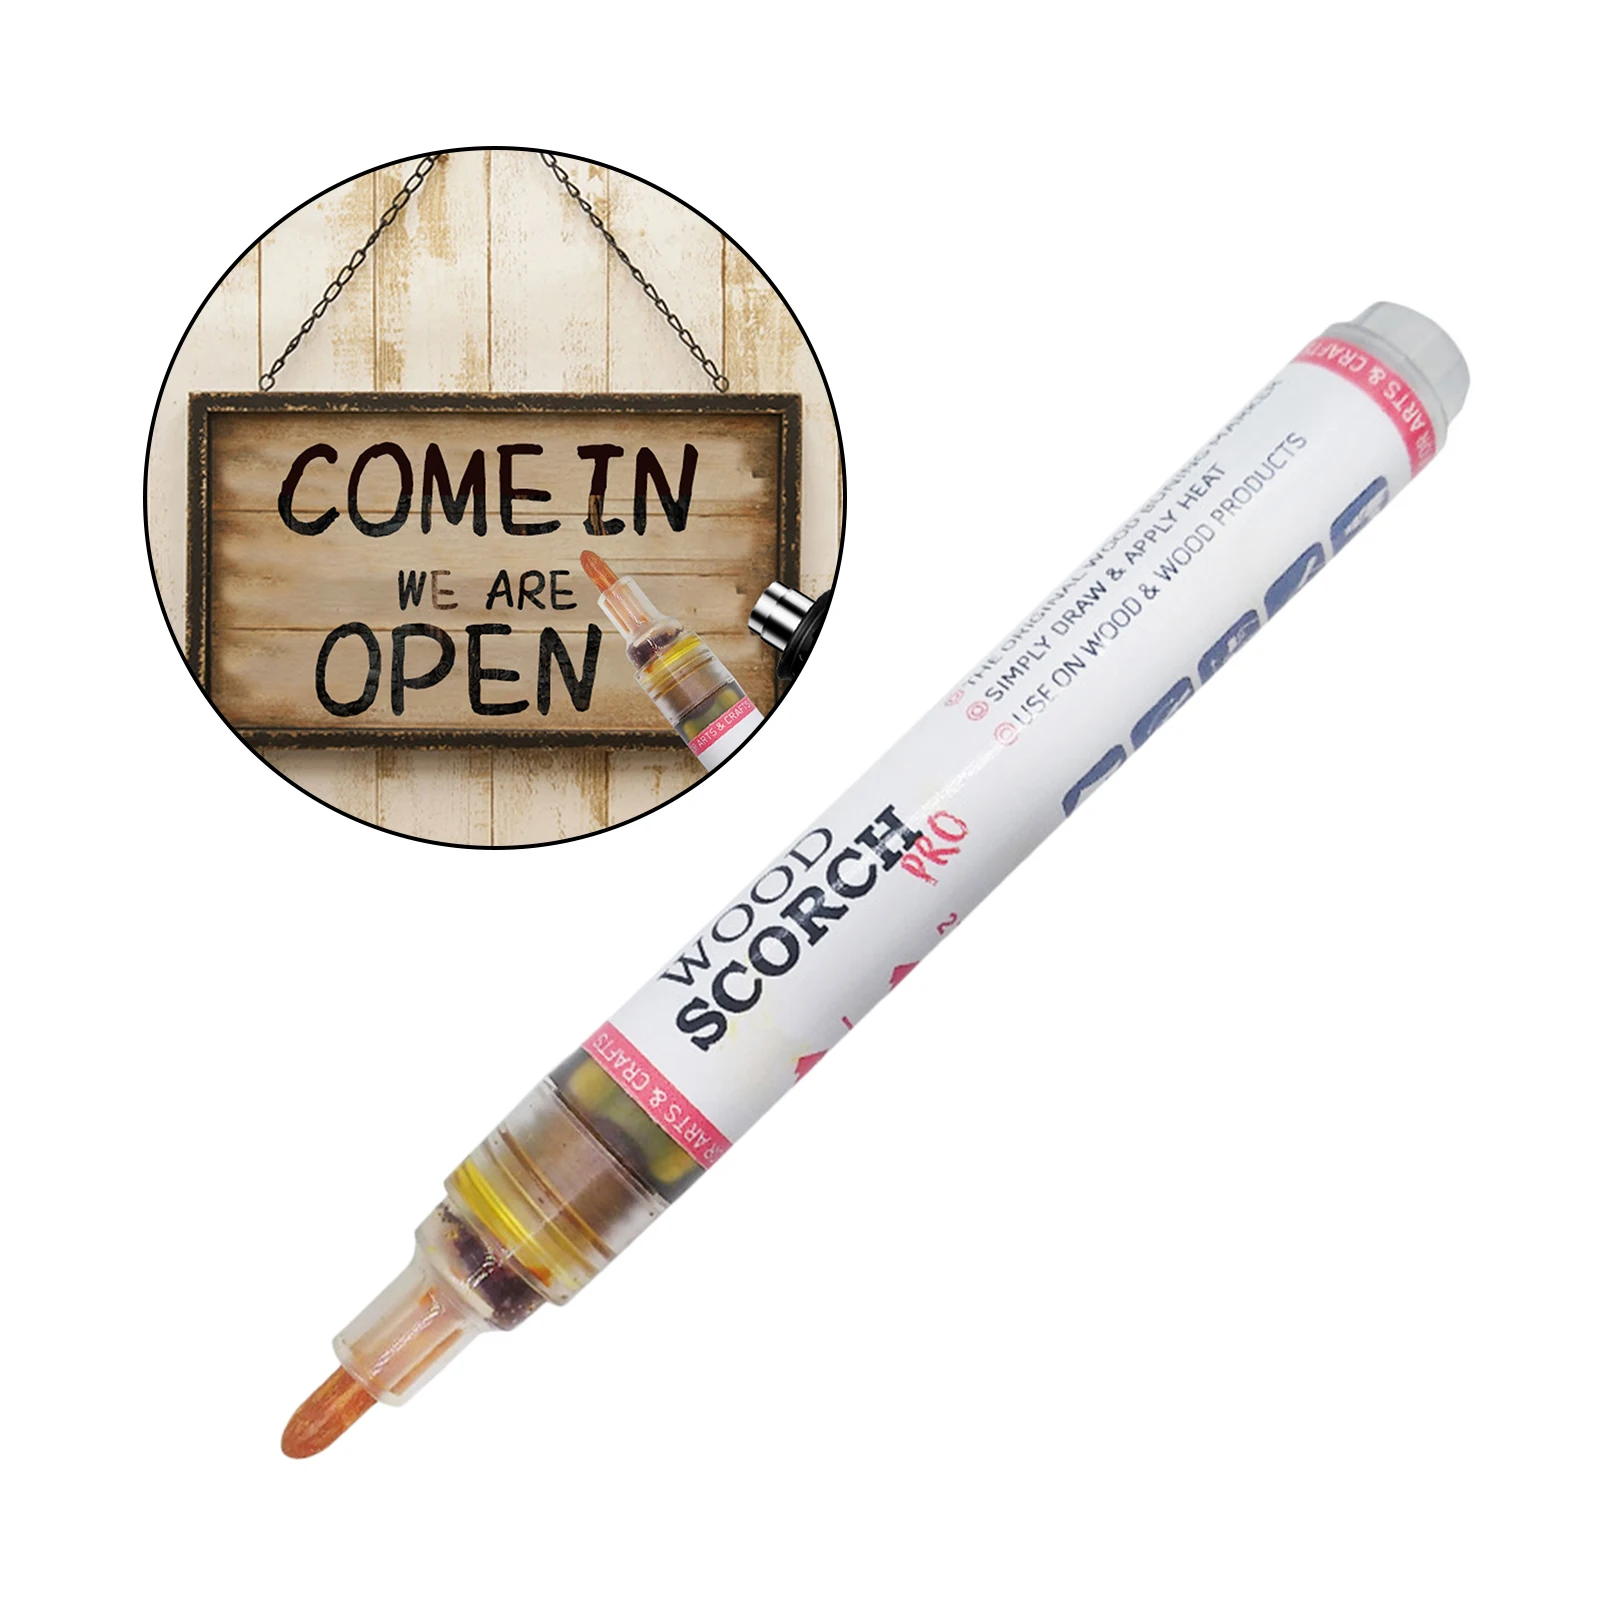 Scorch Pen Marker Chemical Wood Burning Pen Wood Burning Markers Pens Stationery for DIY Wood Crafts Projects